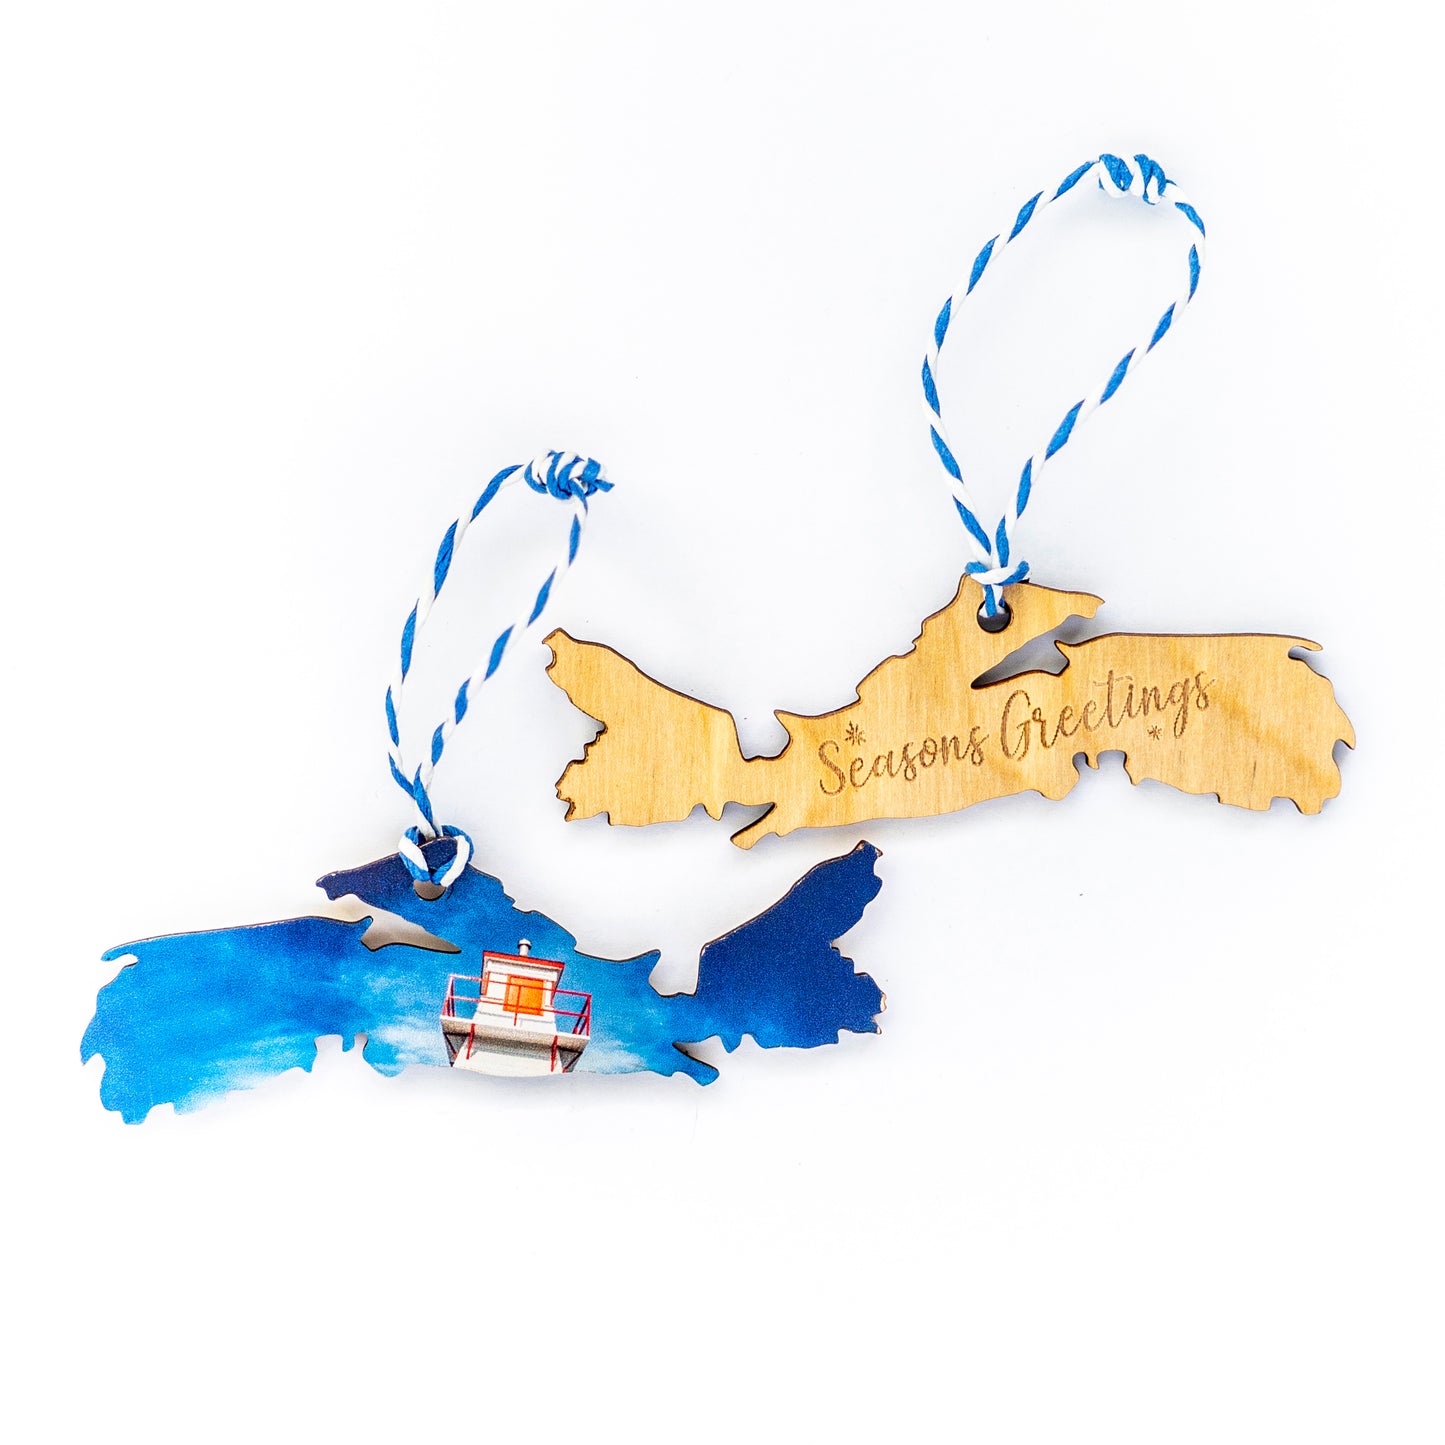 Nova Scotia Wooden Holiday Ornament <br>Seasons Greetings <br> Lighthouse